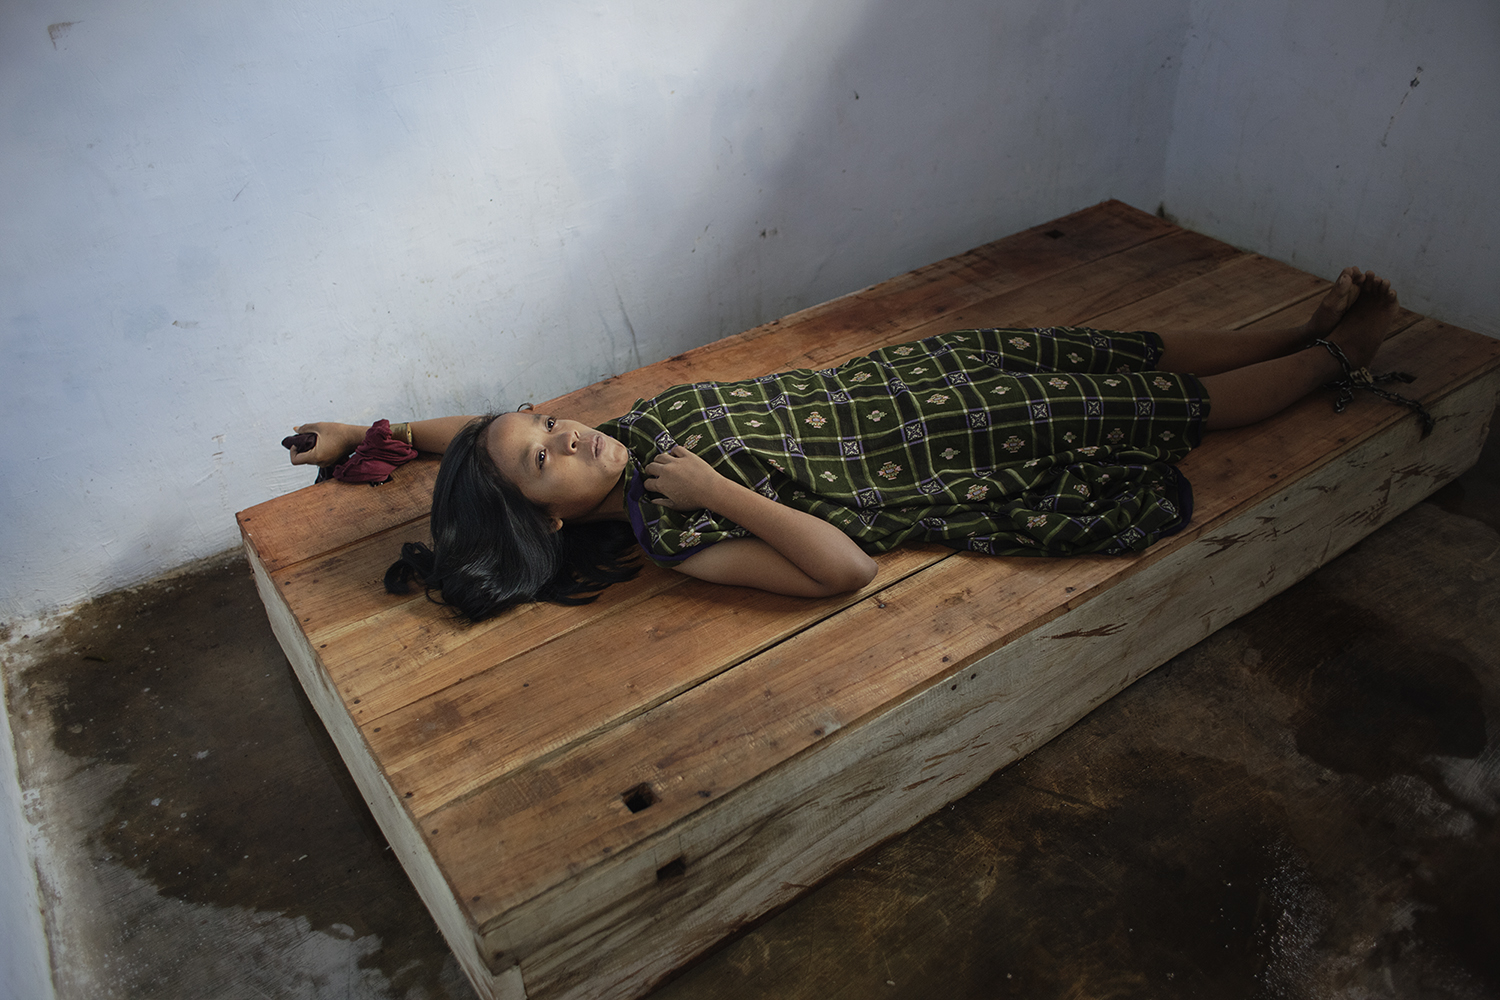 Maftukhah is suffering from depression. After her husband left her to marry another woman, her family brought her to Yayasin Bina Lestari, a small foundation under the Brebes Department of Religion.